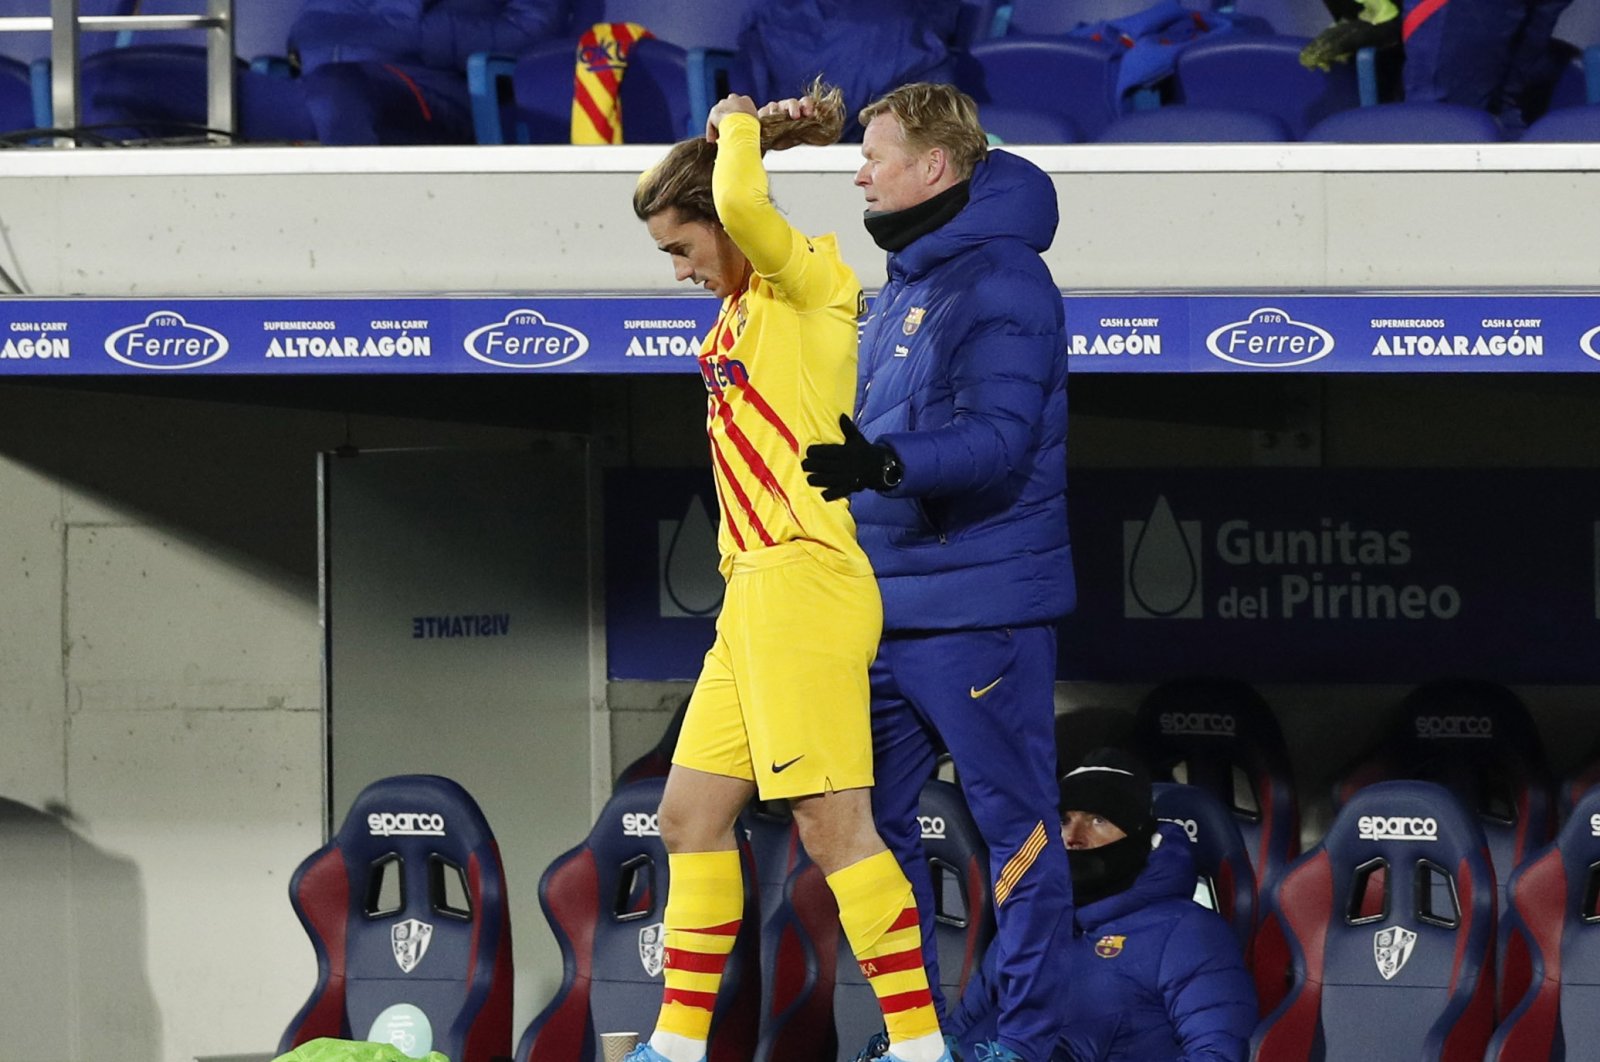 Barcelona coach Ronald Koeman (R) and Antoine Griezmann (L) during a match between Huesca and Barcelona, in Huesca, Spain, Jan. 3, 2021. (REUTERS PHOTO)